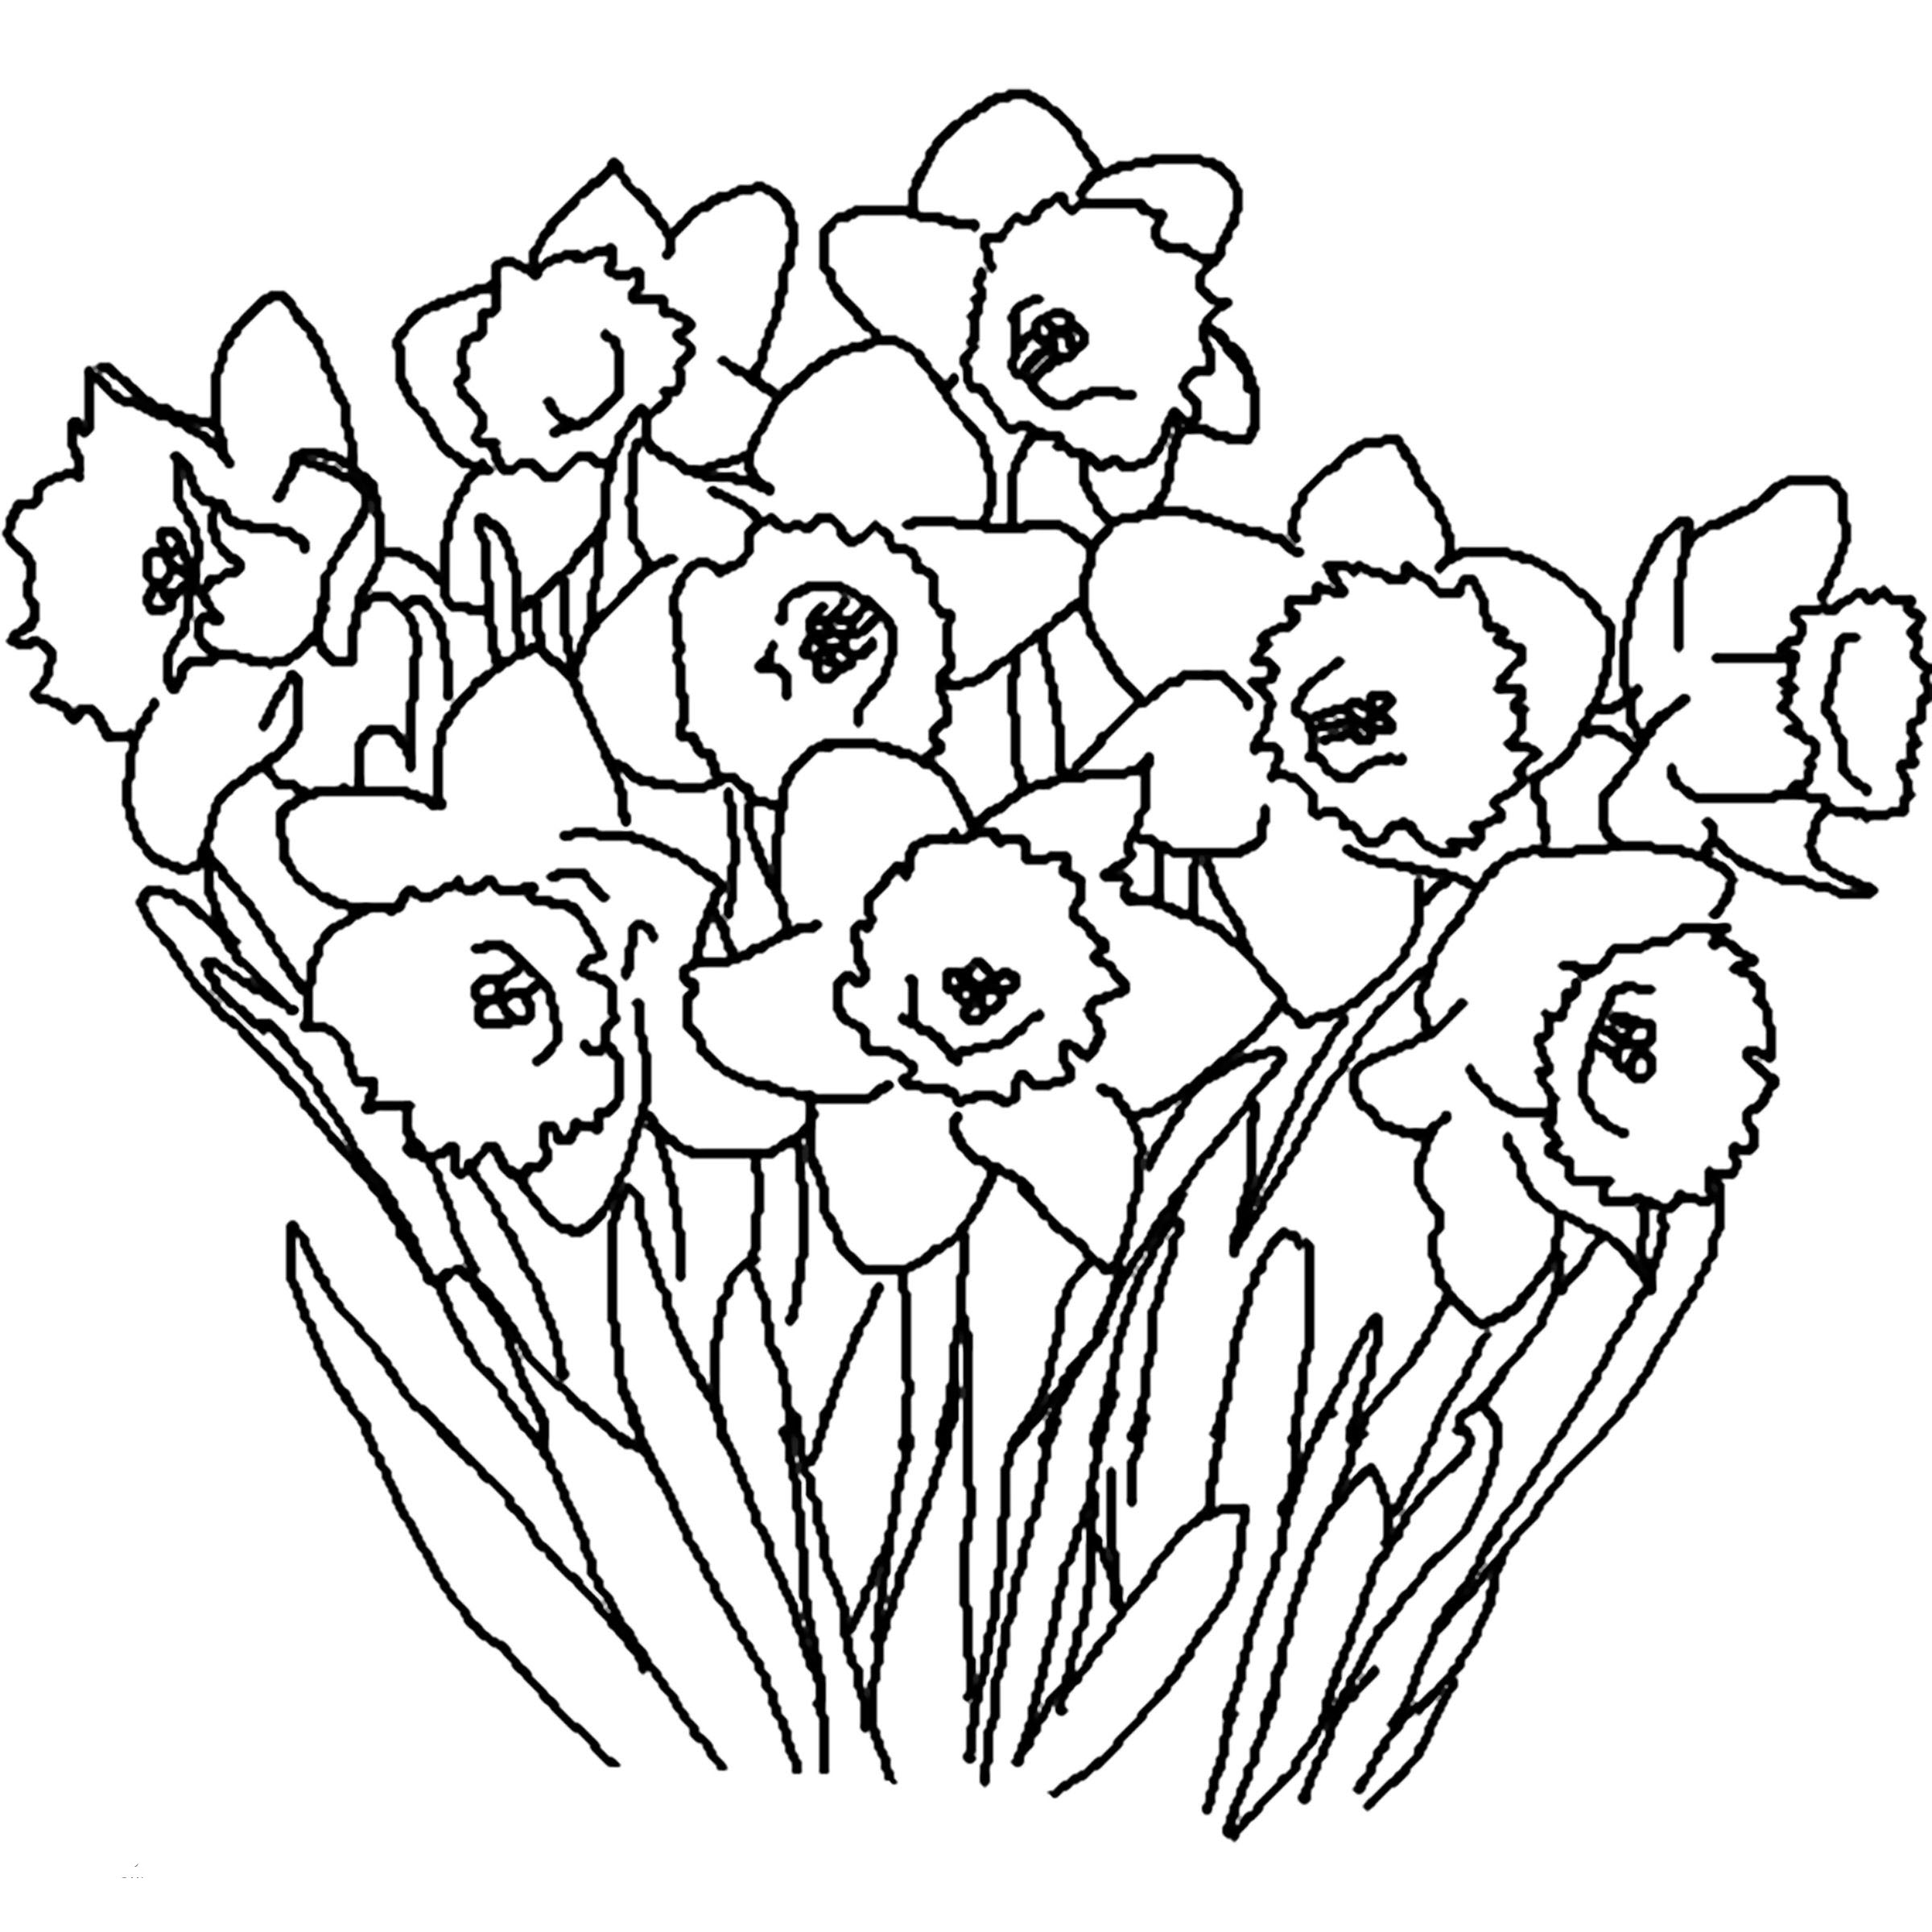 The most beautiful flowers coloring page